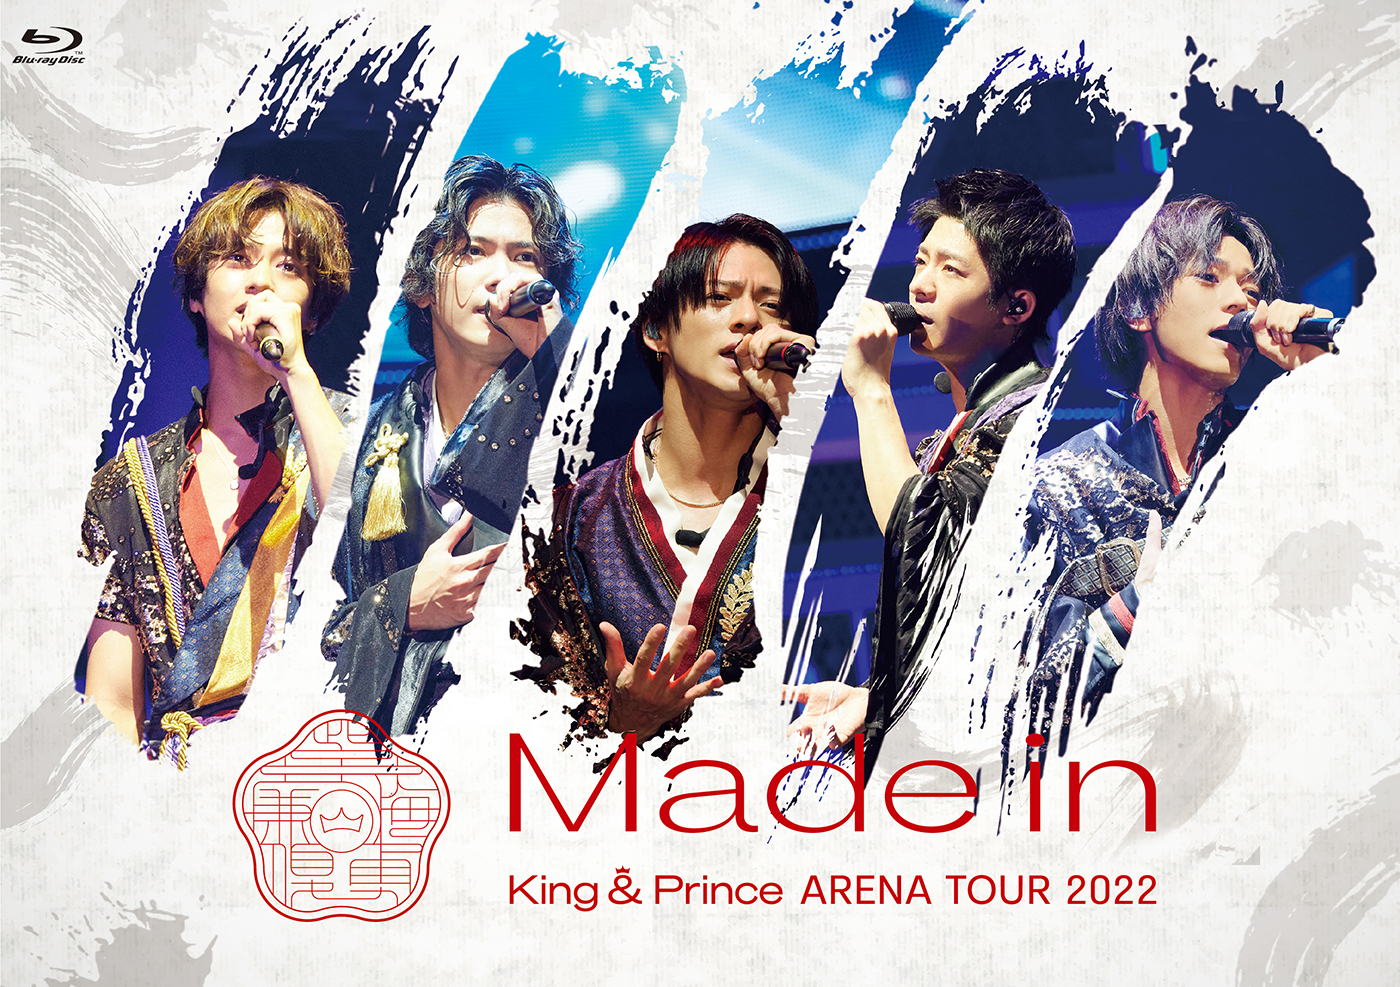 King ＆ Prince、ライブBD＆DVD『King ＆ Prince ARENA TOUR 2022 ～Made in～』の詳細公開 - 画像一覧（4/4）